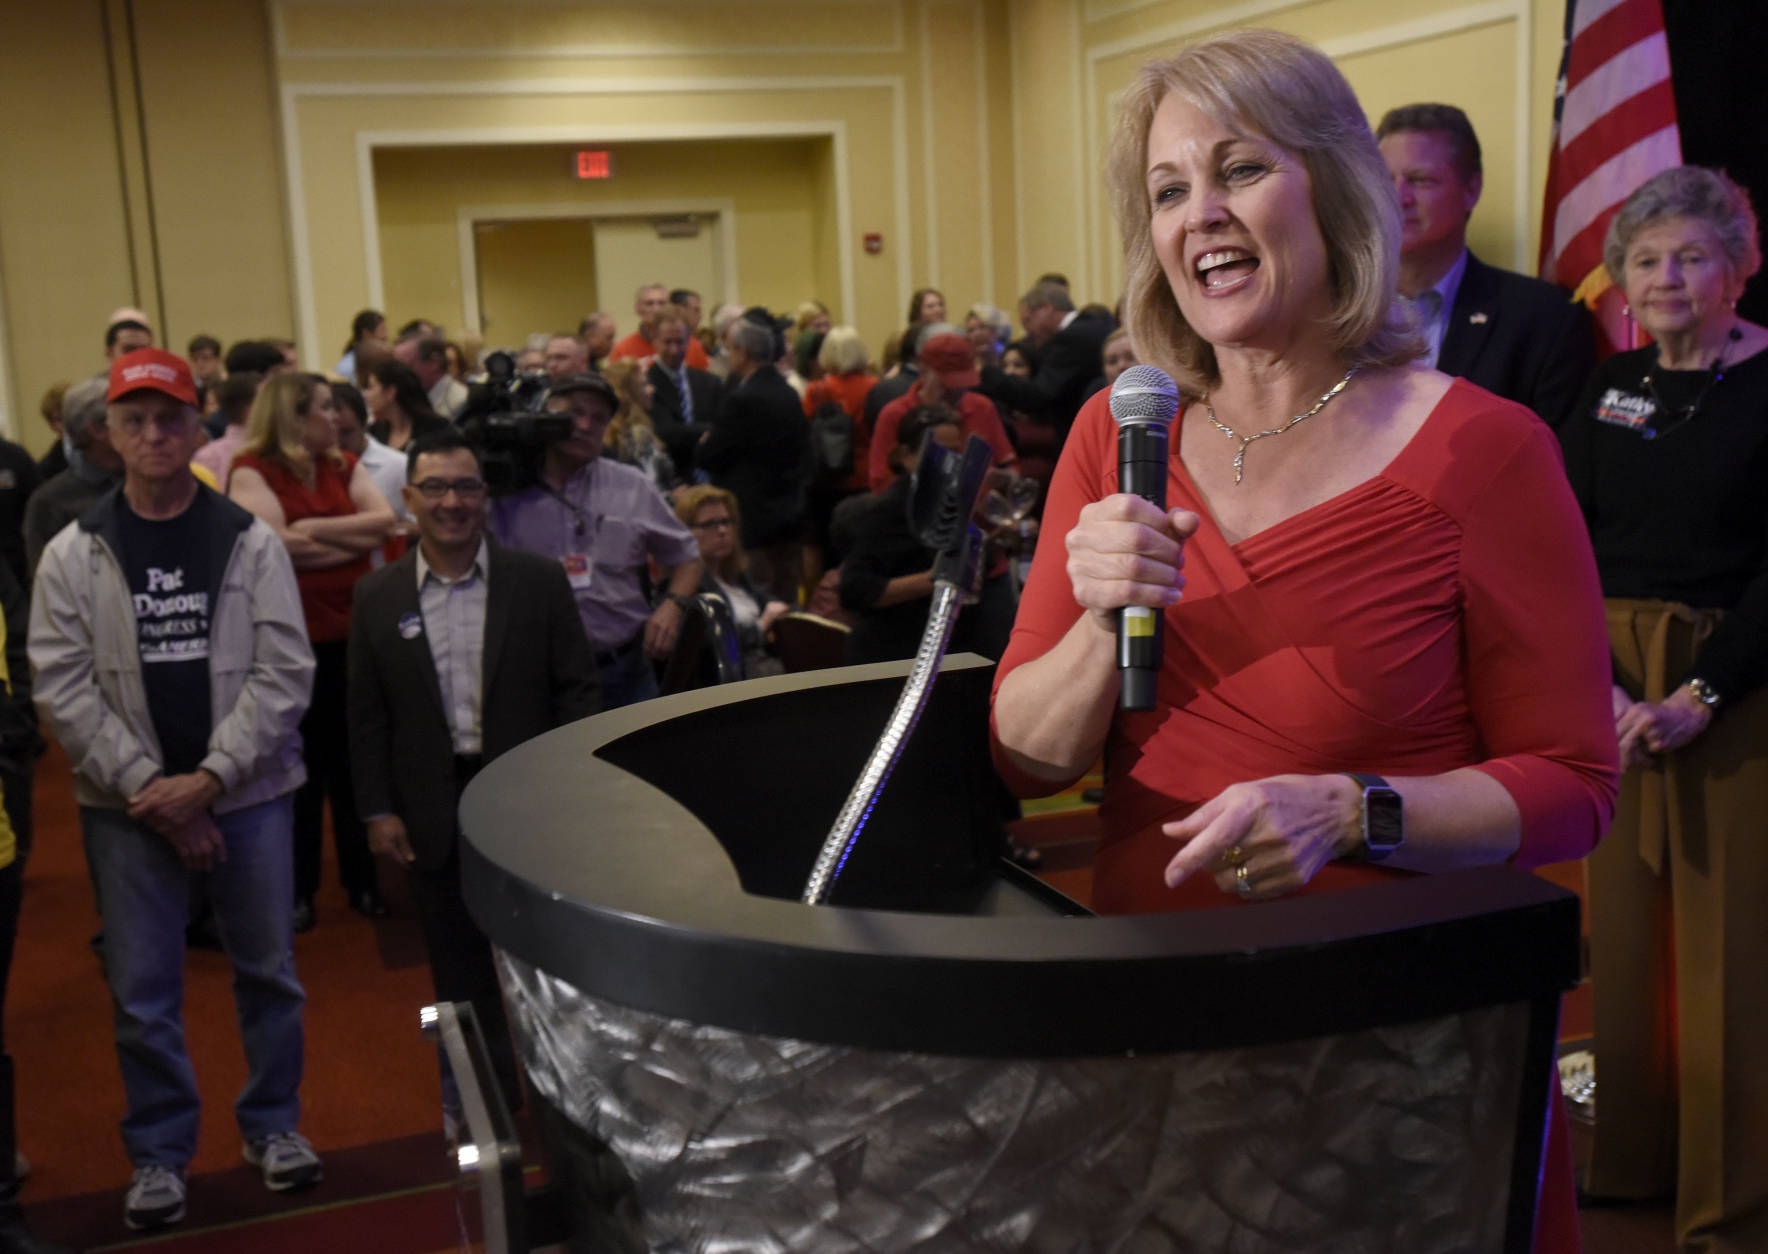 Maryland Republican Senate candidate, Maryland Del. Kathy Szeliga concedes her race during an election night party held by the Maryland Republican Party, Tuesday, Nov. 8, 2016, in Linthicum, Md. (AP Photo/Steve Ruark)